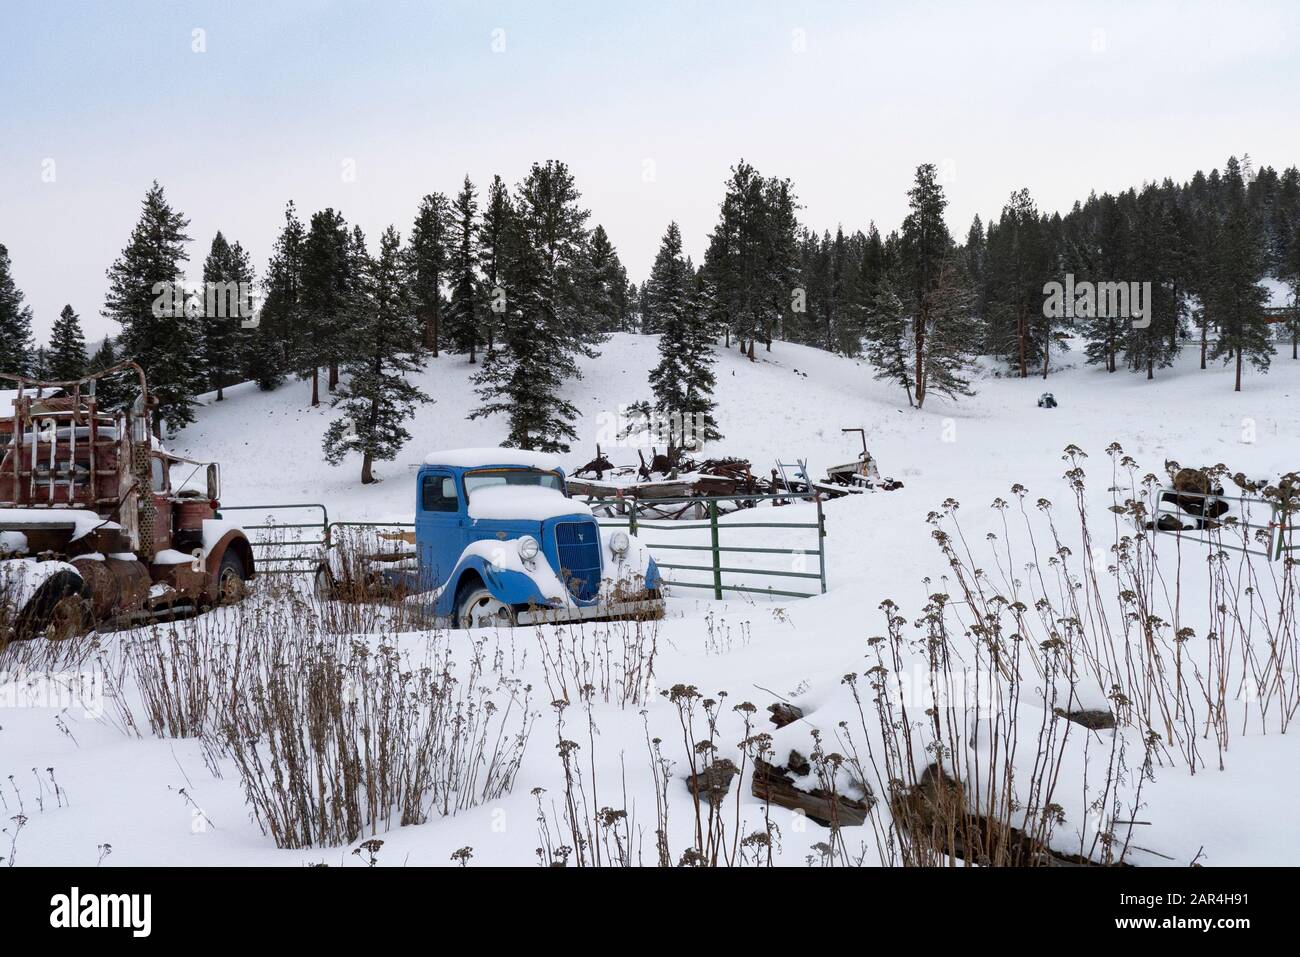 A 1935 Ford farm truck, covered in the snow, on a farm in Beavertail, Montana. Stock Photo